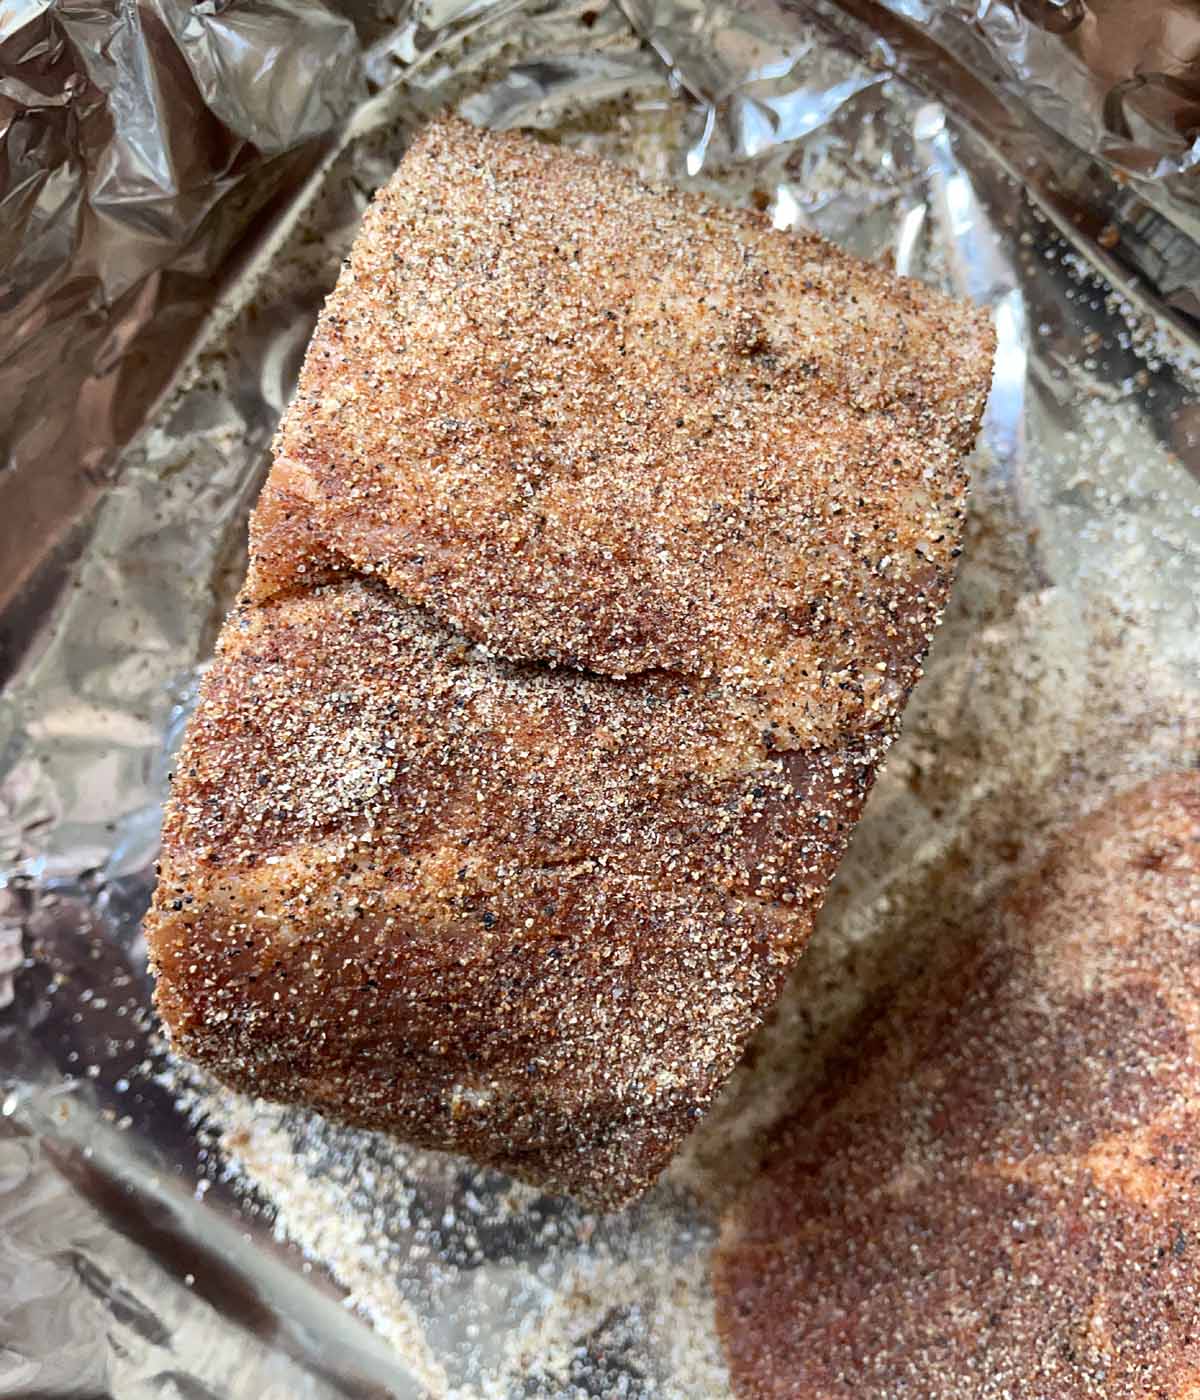 A raw chunk of pork coated in dry seasonings in a foil-lined pan.